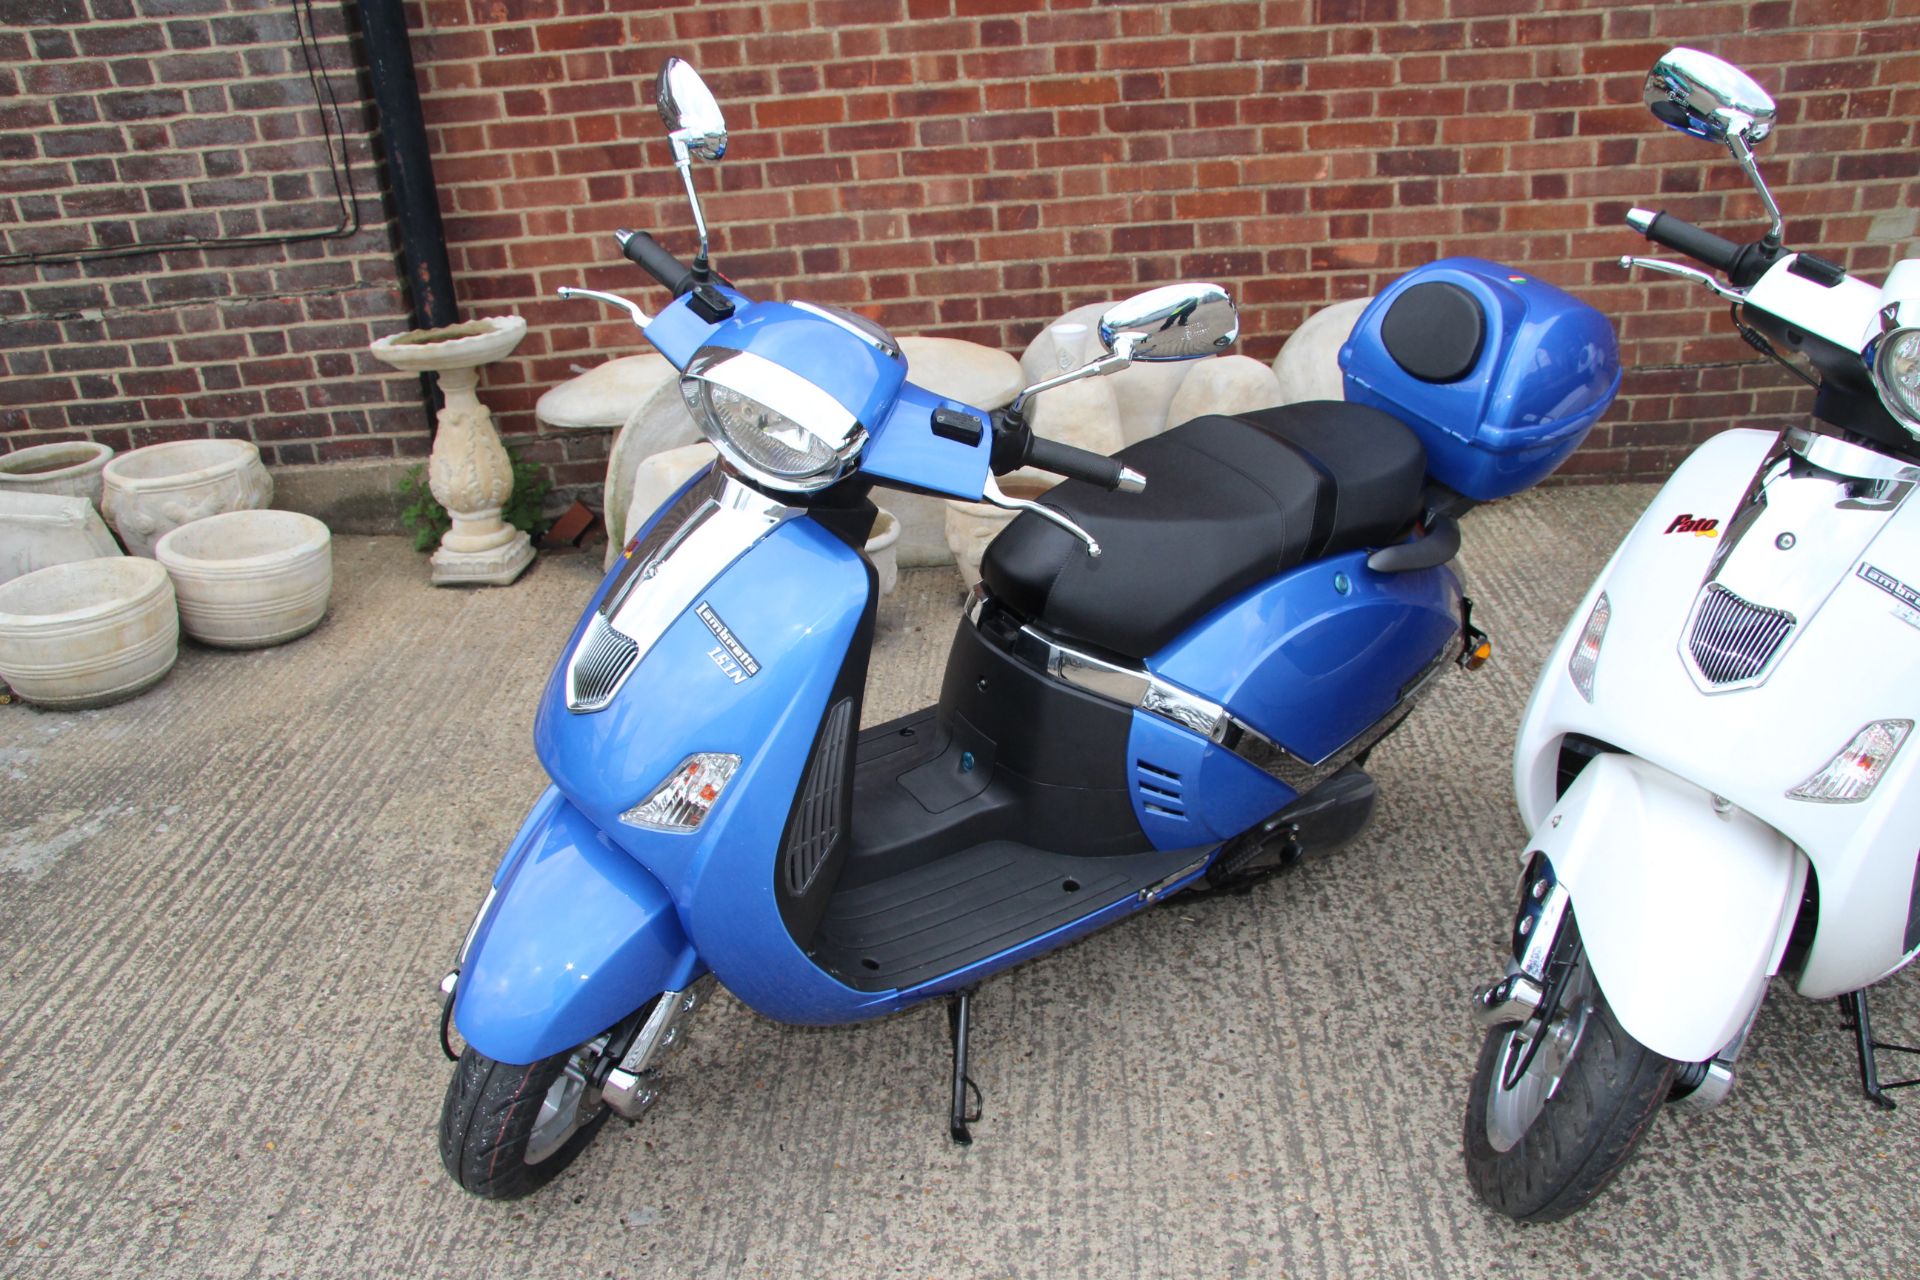 V Brand New Lambretta Pato 151cc Scooter-BLUE -/Mileage 00000 Boxed ISP £1250 (Motorcycle Movers)